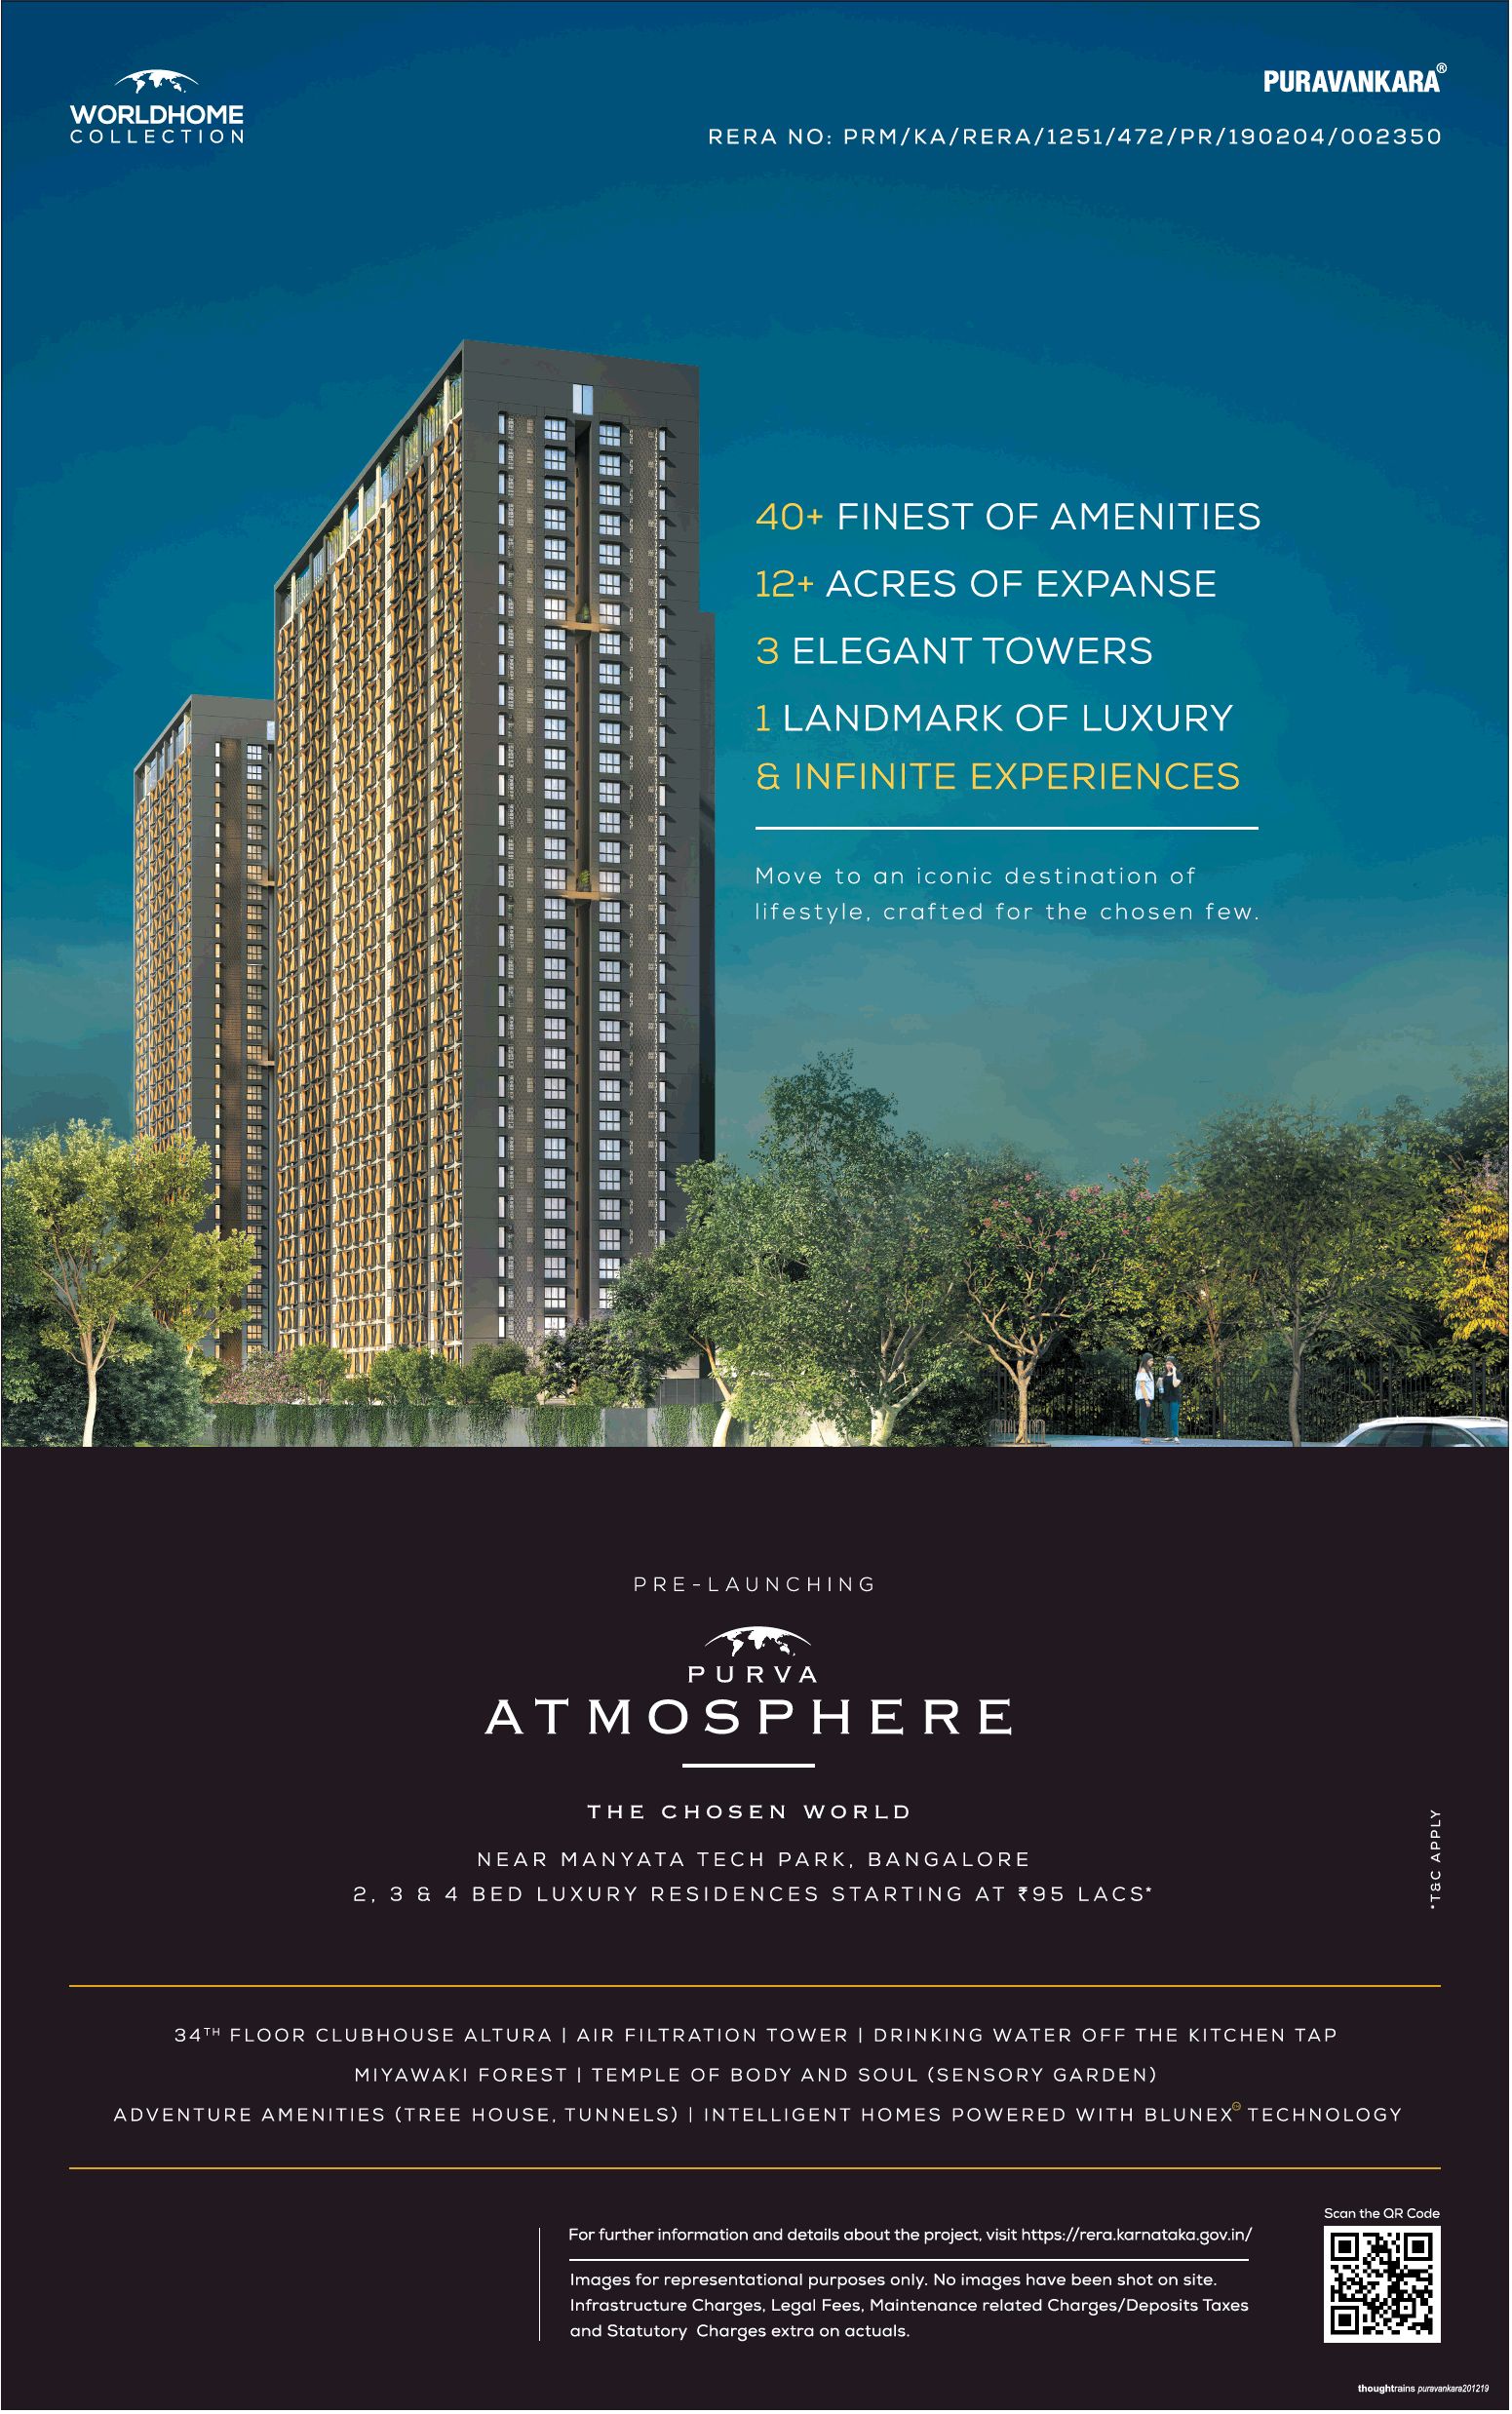 Presenting 40+ finest of amenities at Purva Atmosphere, Bangalore Update